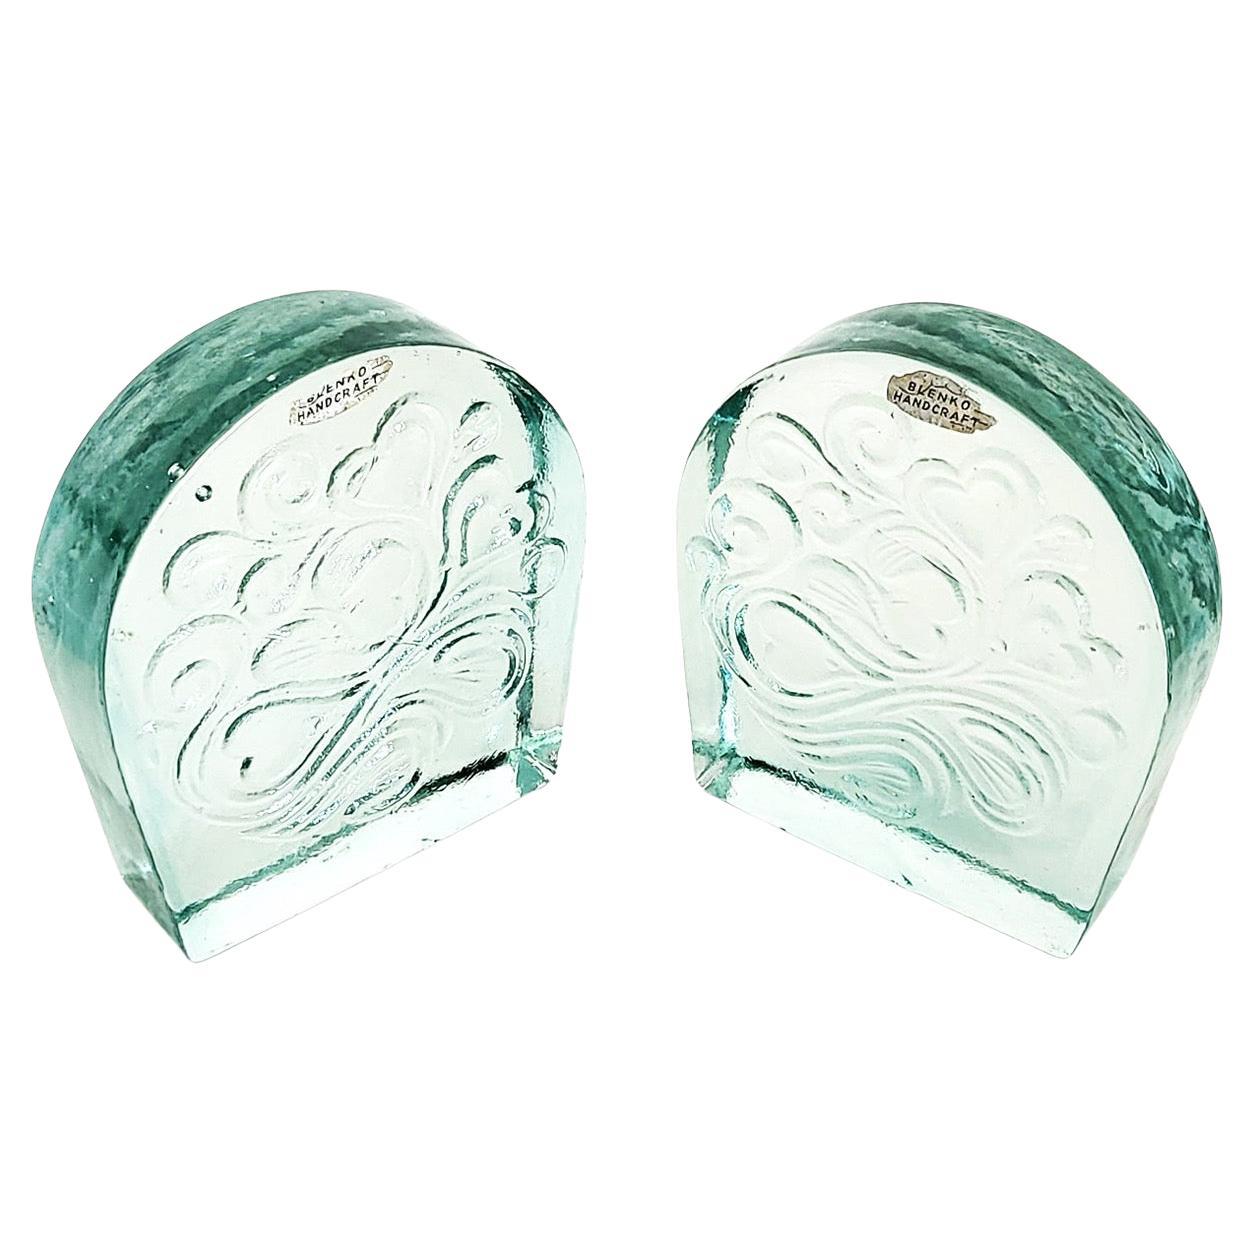 Blenko Glass Twisted Hearts Clear Block Bookends Wayne Husted, 1969